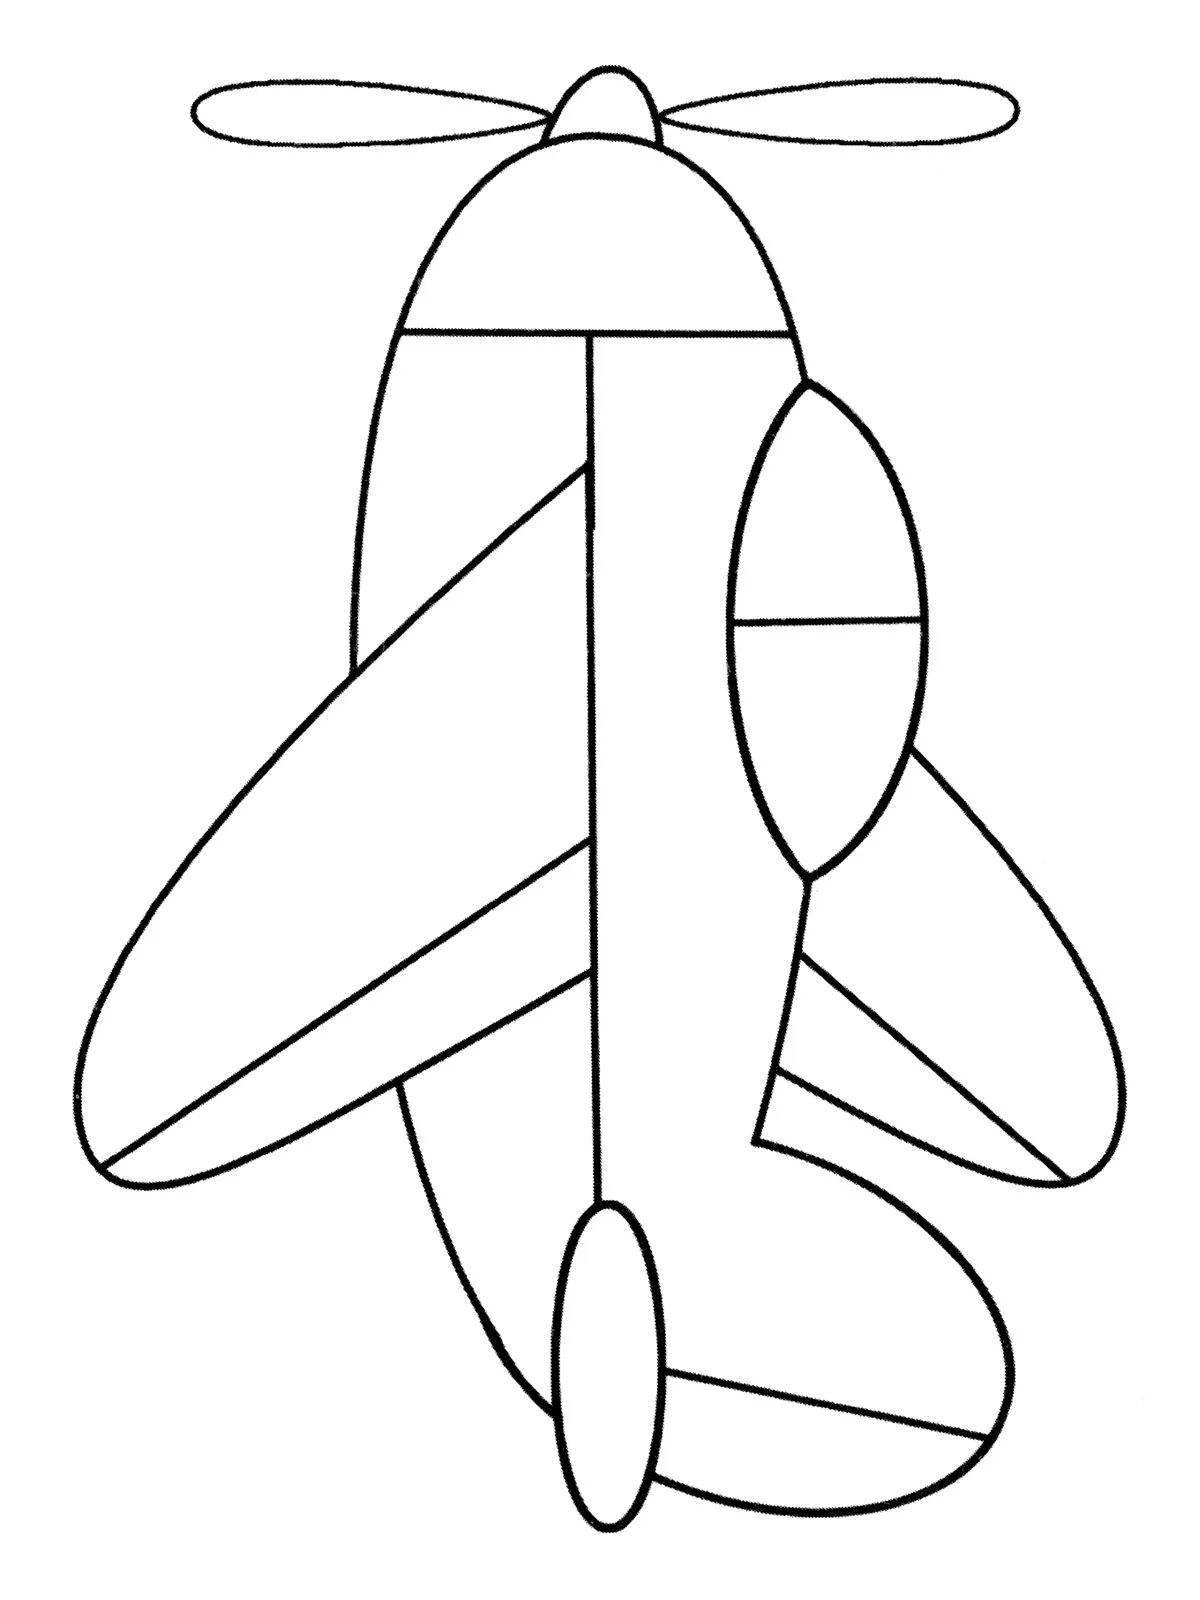 Amazing airplane coloring pages for 4-5 year olds